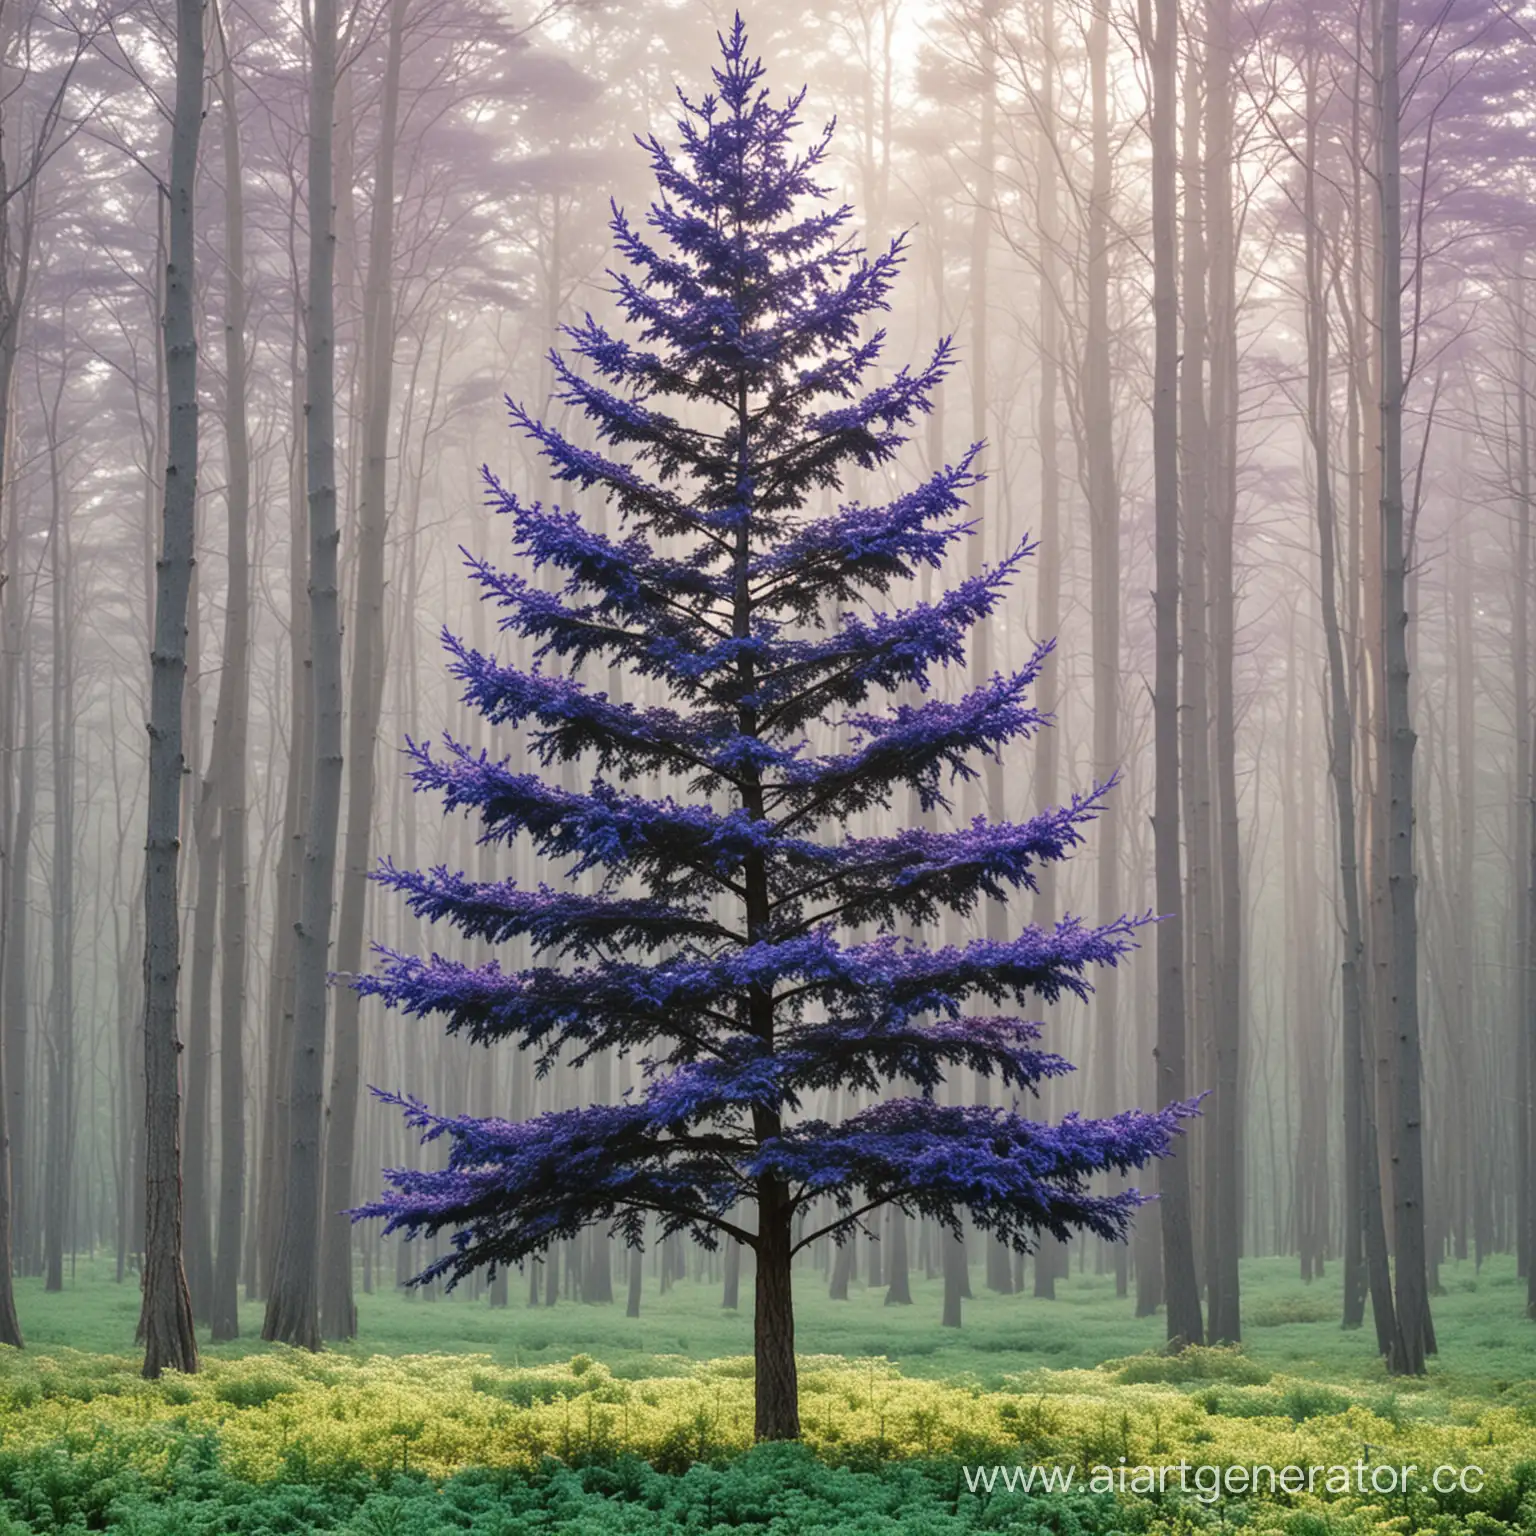 Enchanted-Spruce-with-Vivid-Blue-and-Violet-Foliage